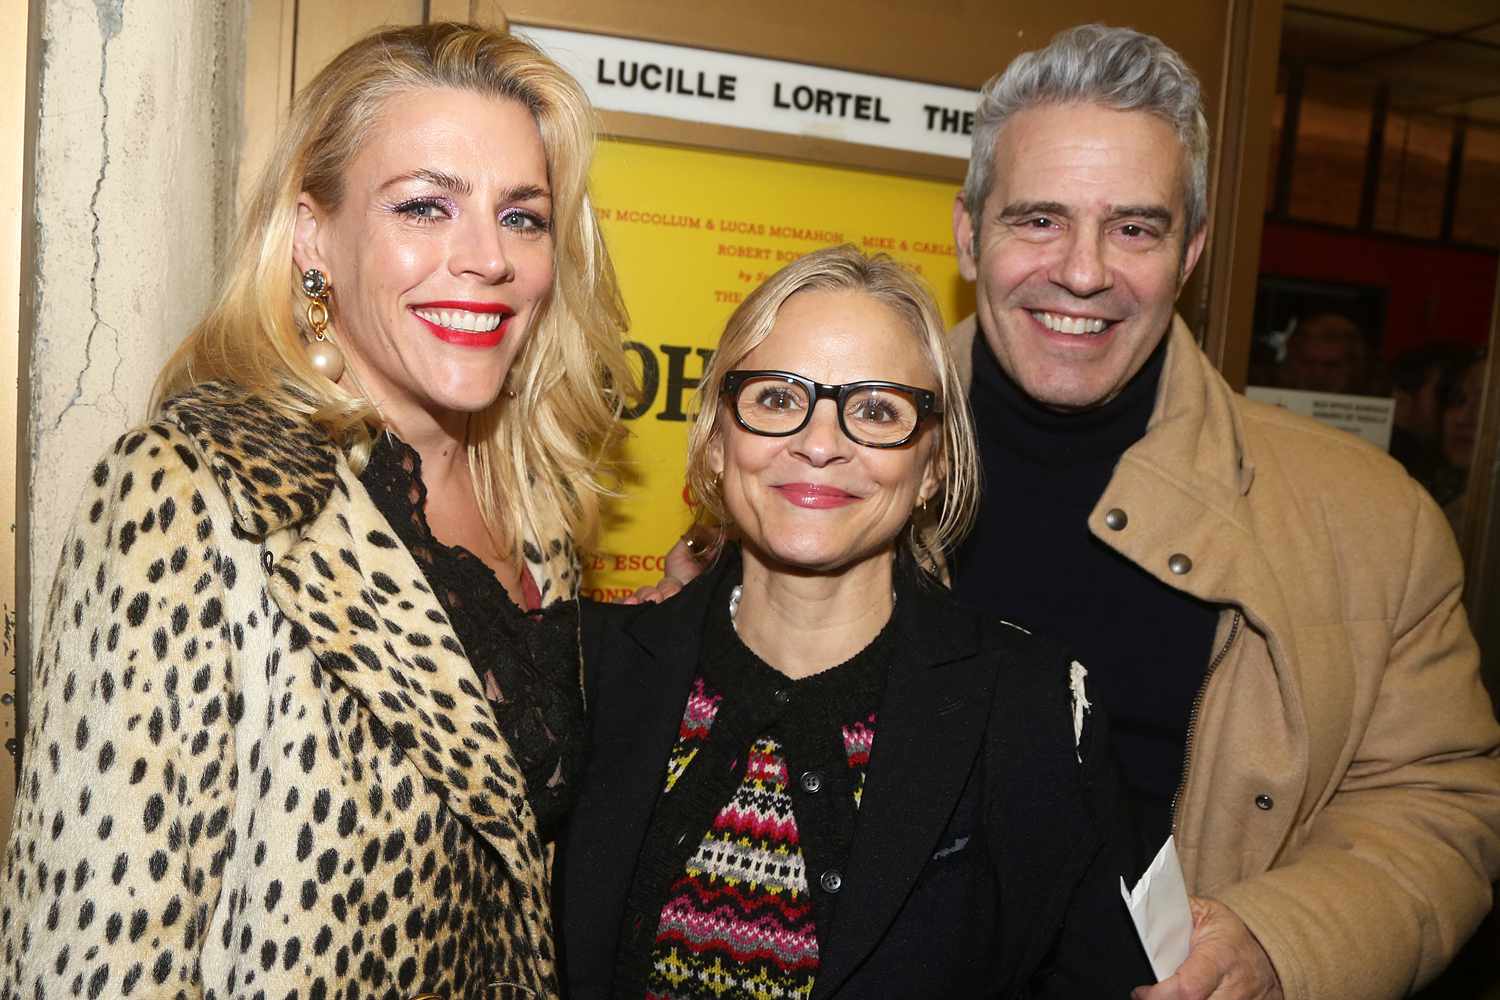 Busy Philipps, Amy Sedaris and Andy Cohen pose at the opening night of the new play "Oh, Mary!" at The Lucille Lortel Theatre on February 8, 2024 in New York City.